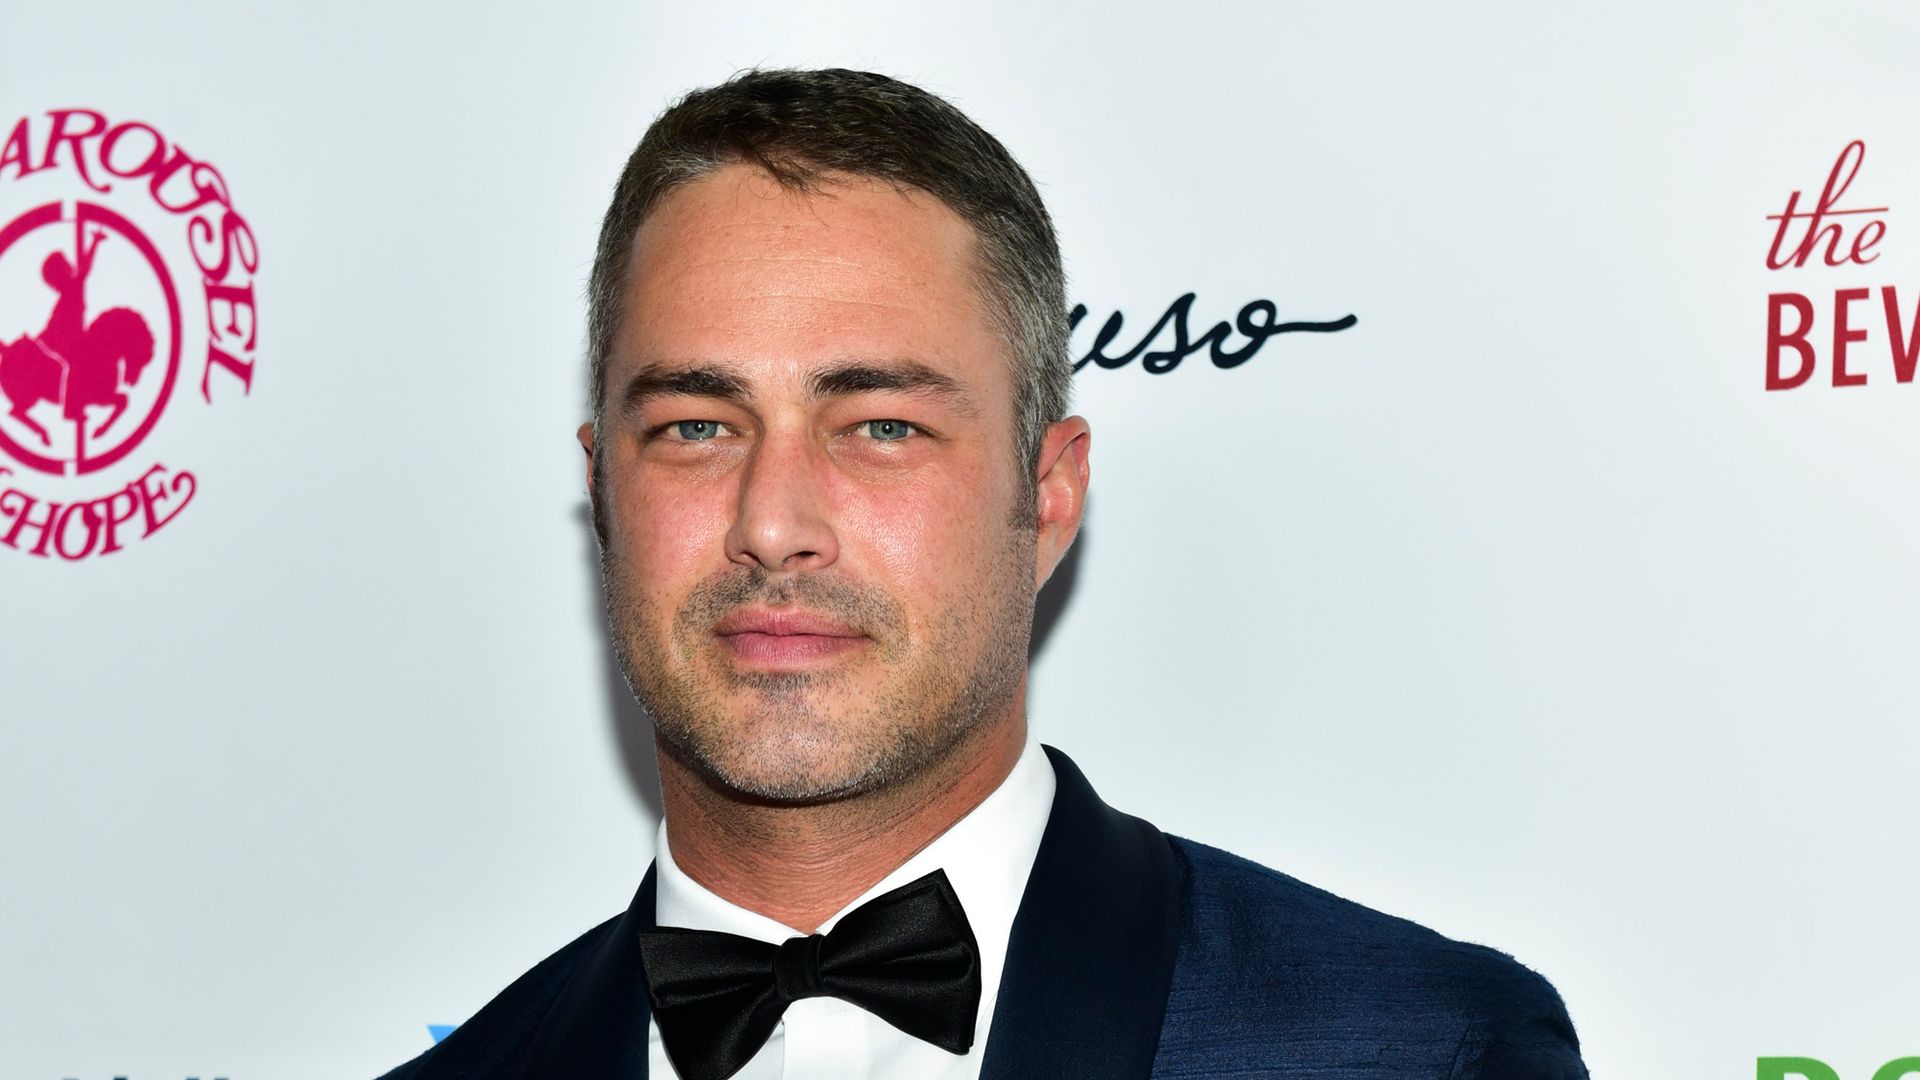 Taylor Kinney attends the 2018 Carousel of Hope Ball at The Beverly Hilton